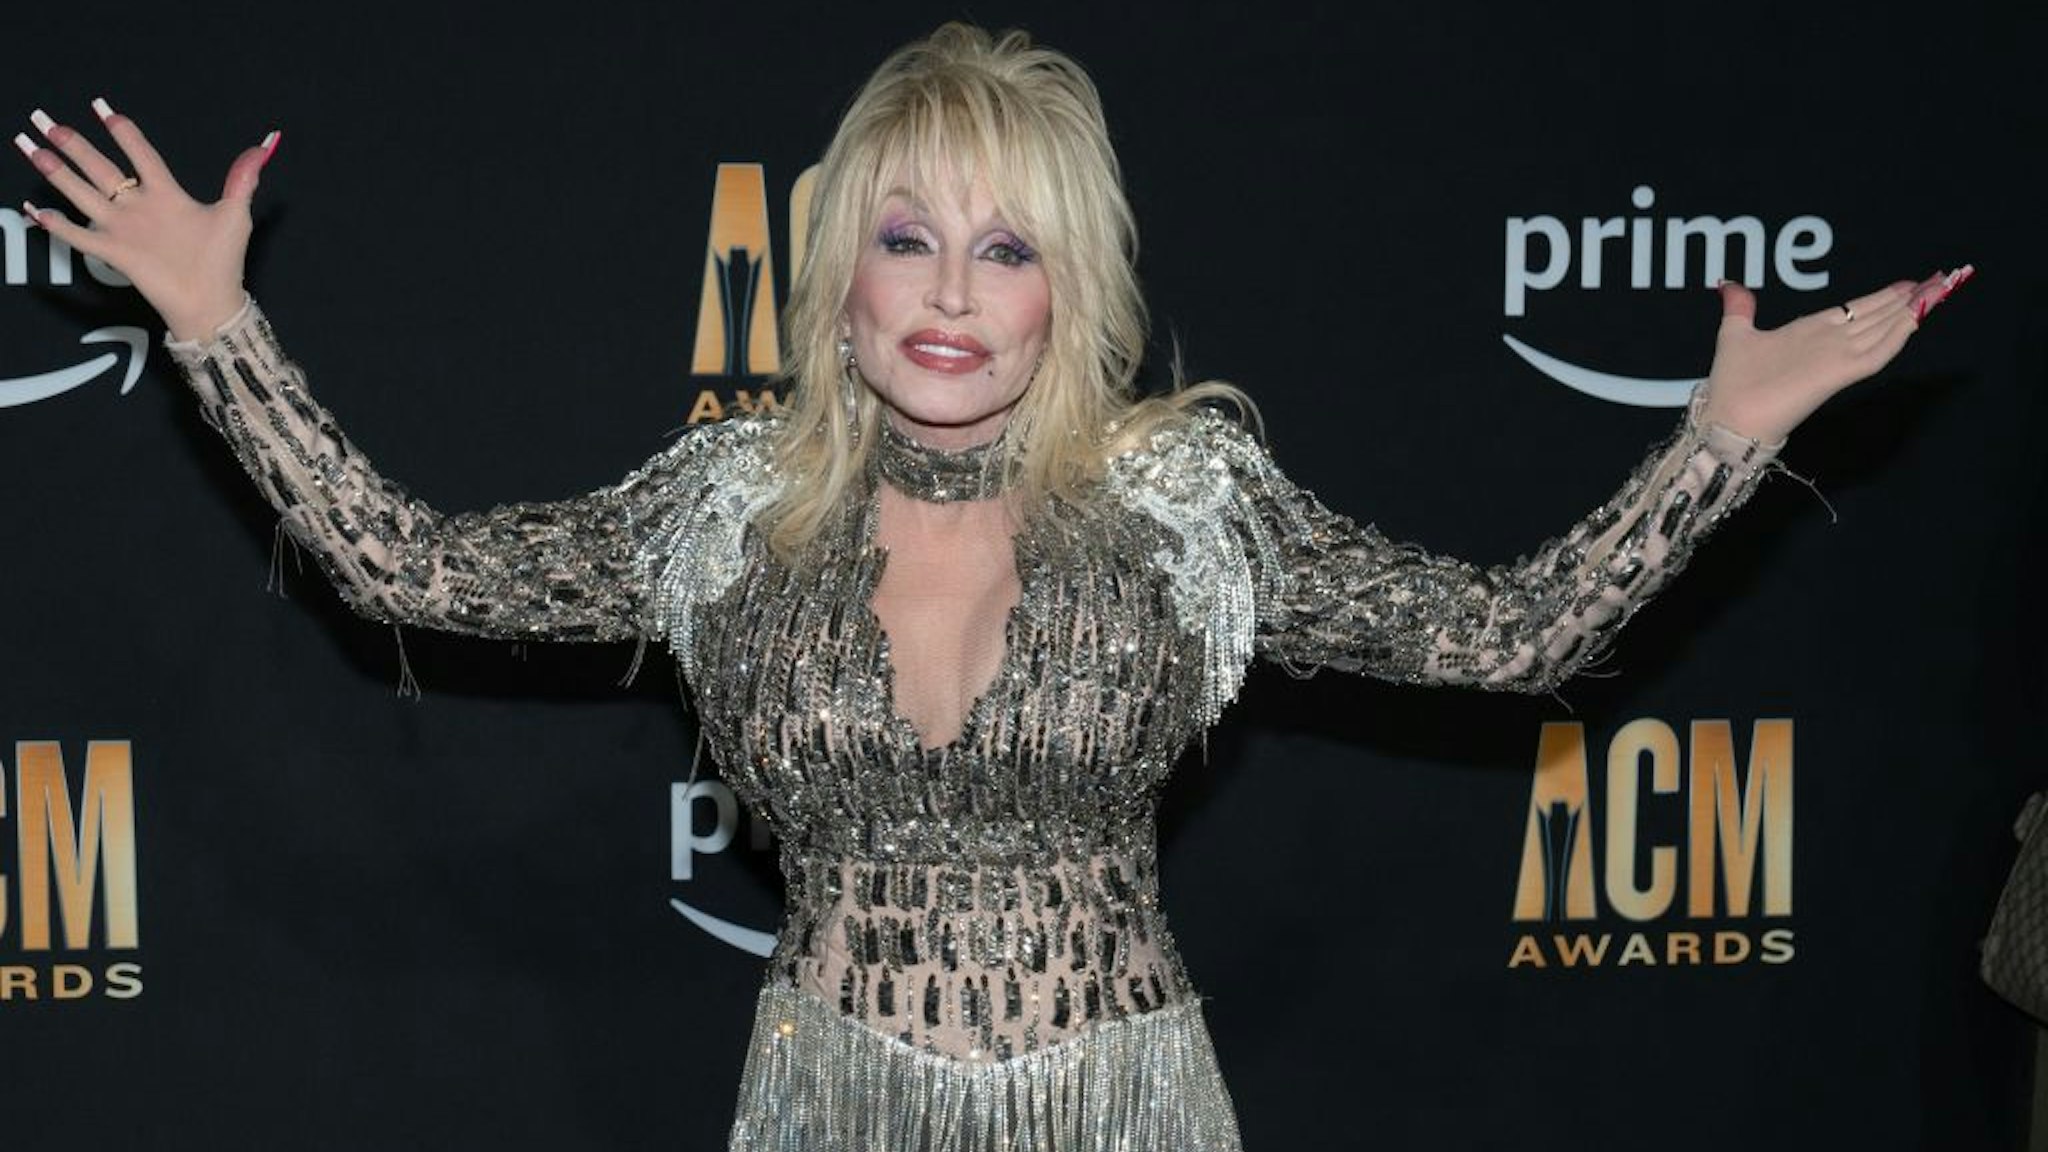 Singer Dolly Parton attends the Academy of Country Music (ACM) Awards at Ford Center at the Star in Frisco, Texas, on May 11, 2023. (Photo by SUZANNE CORDEIRO / AFP) (Photo by SUZANNE CORDEIRO/AFP via Getty Images)